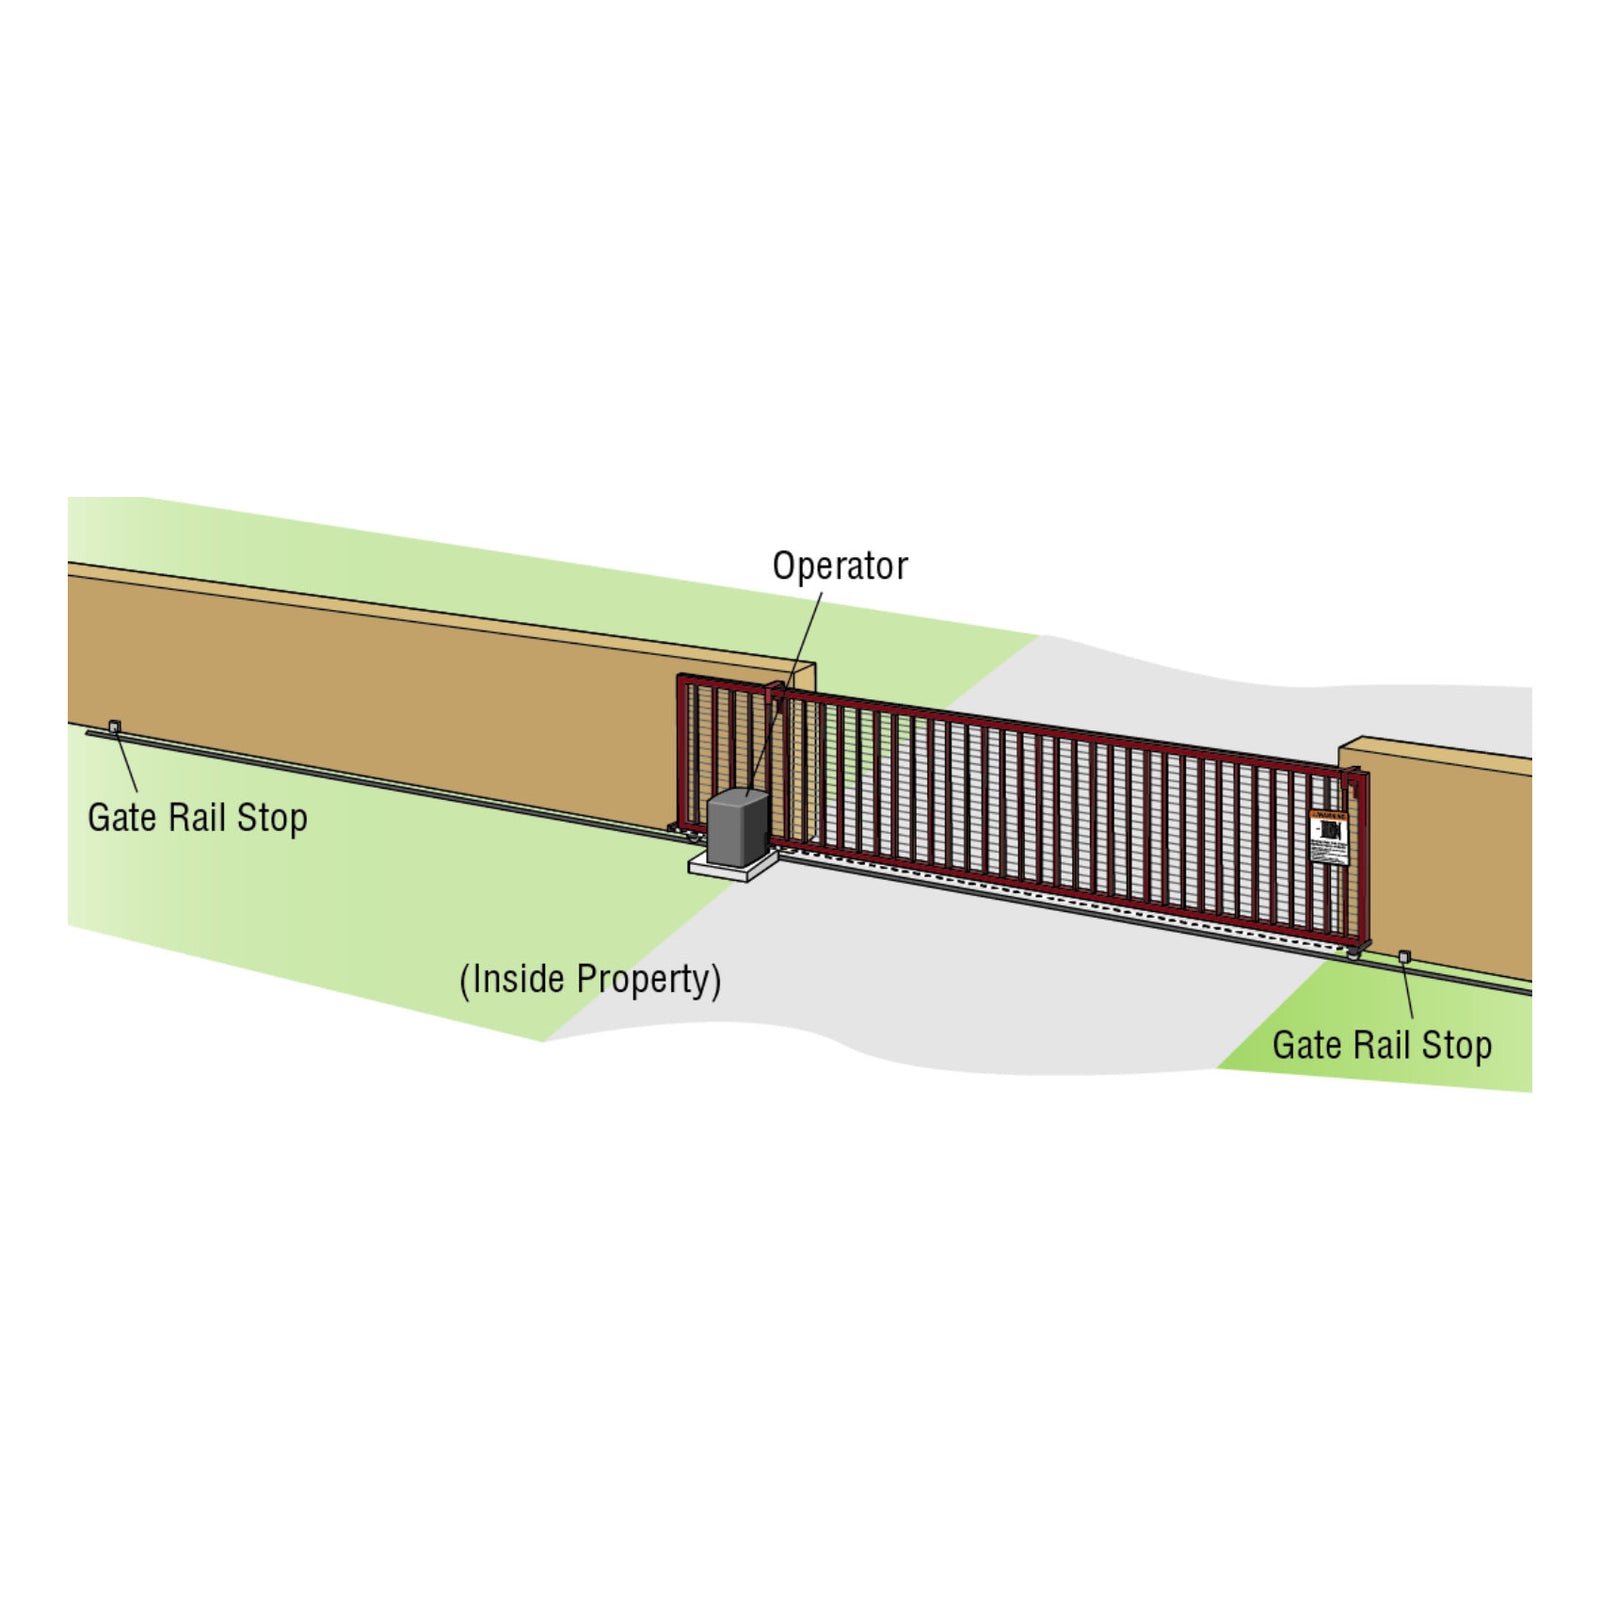 I don't know anything about sliding gates - which slide gate operator should I choose